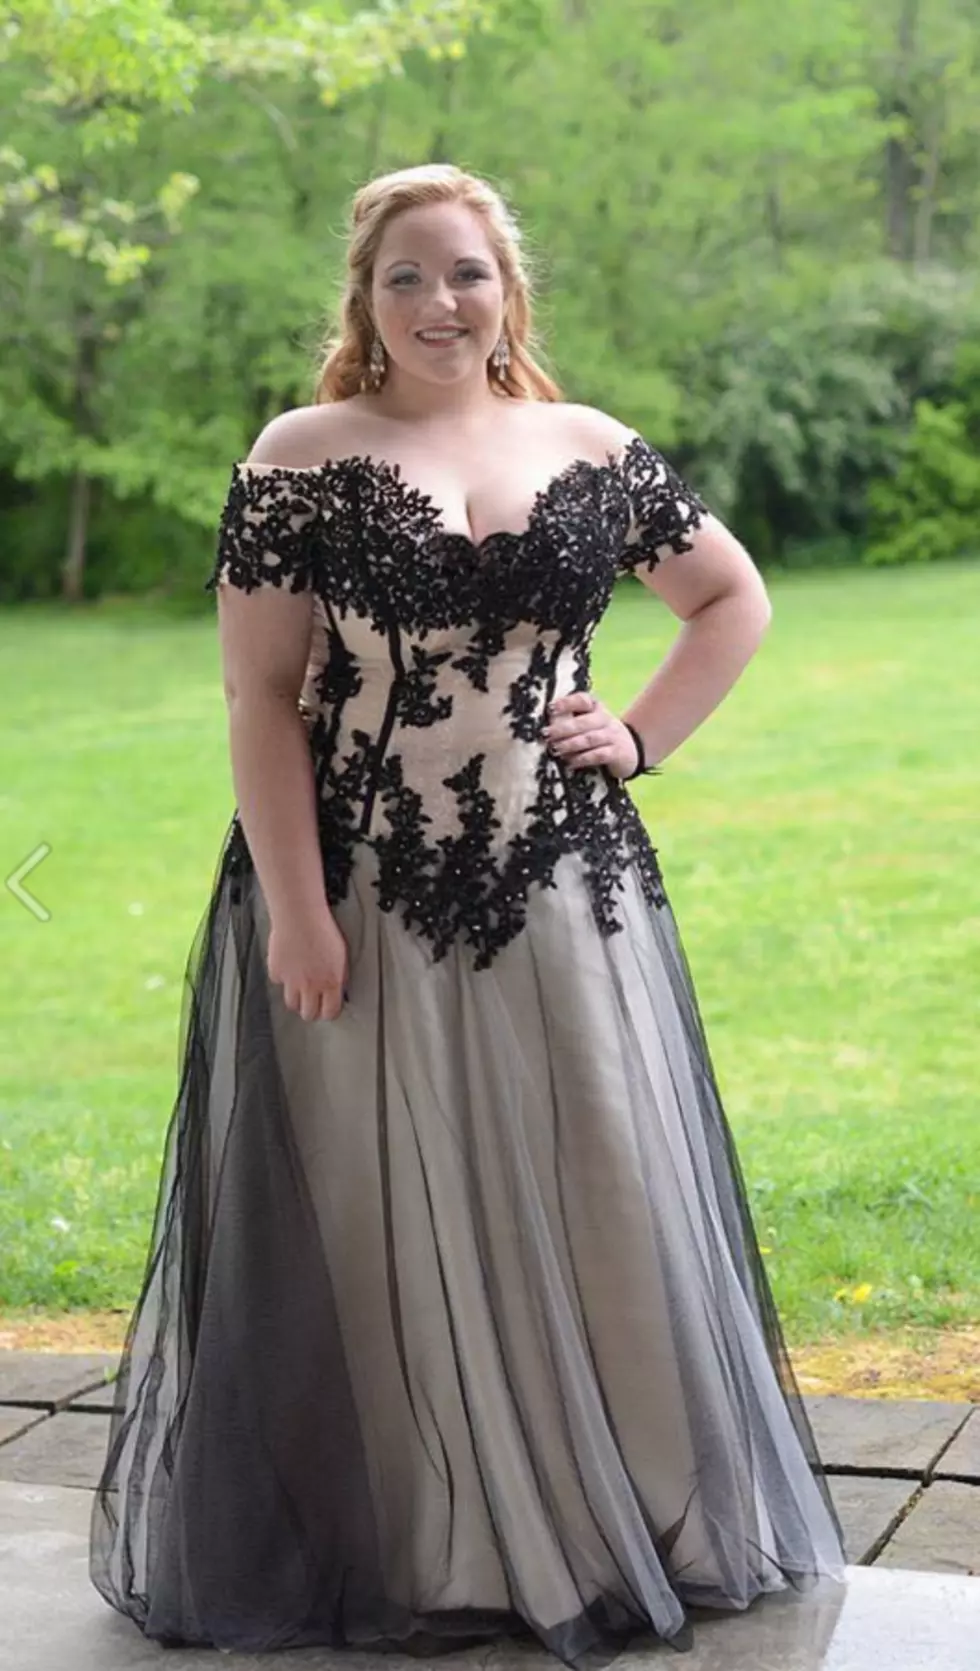 High School Girl’s Prom Pic Goes Viral After Being Called A ‘Big Girl’ And Was Made To ‘Cover Up’ [PIC]